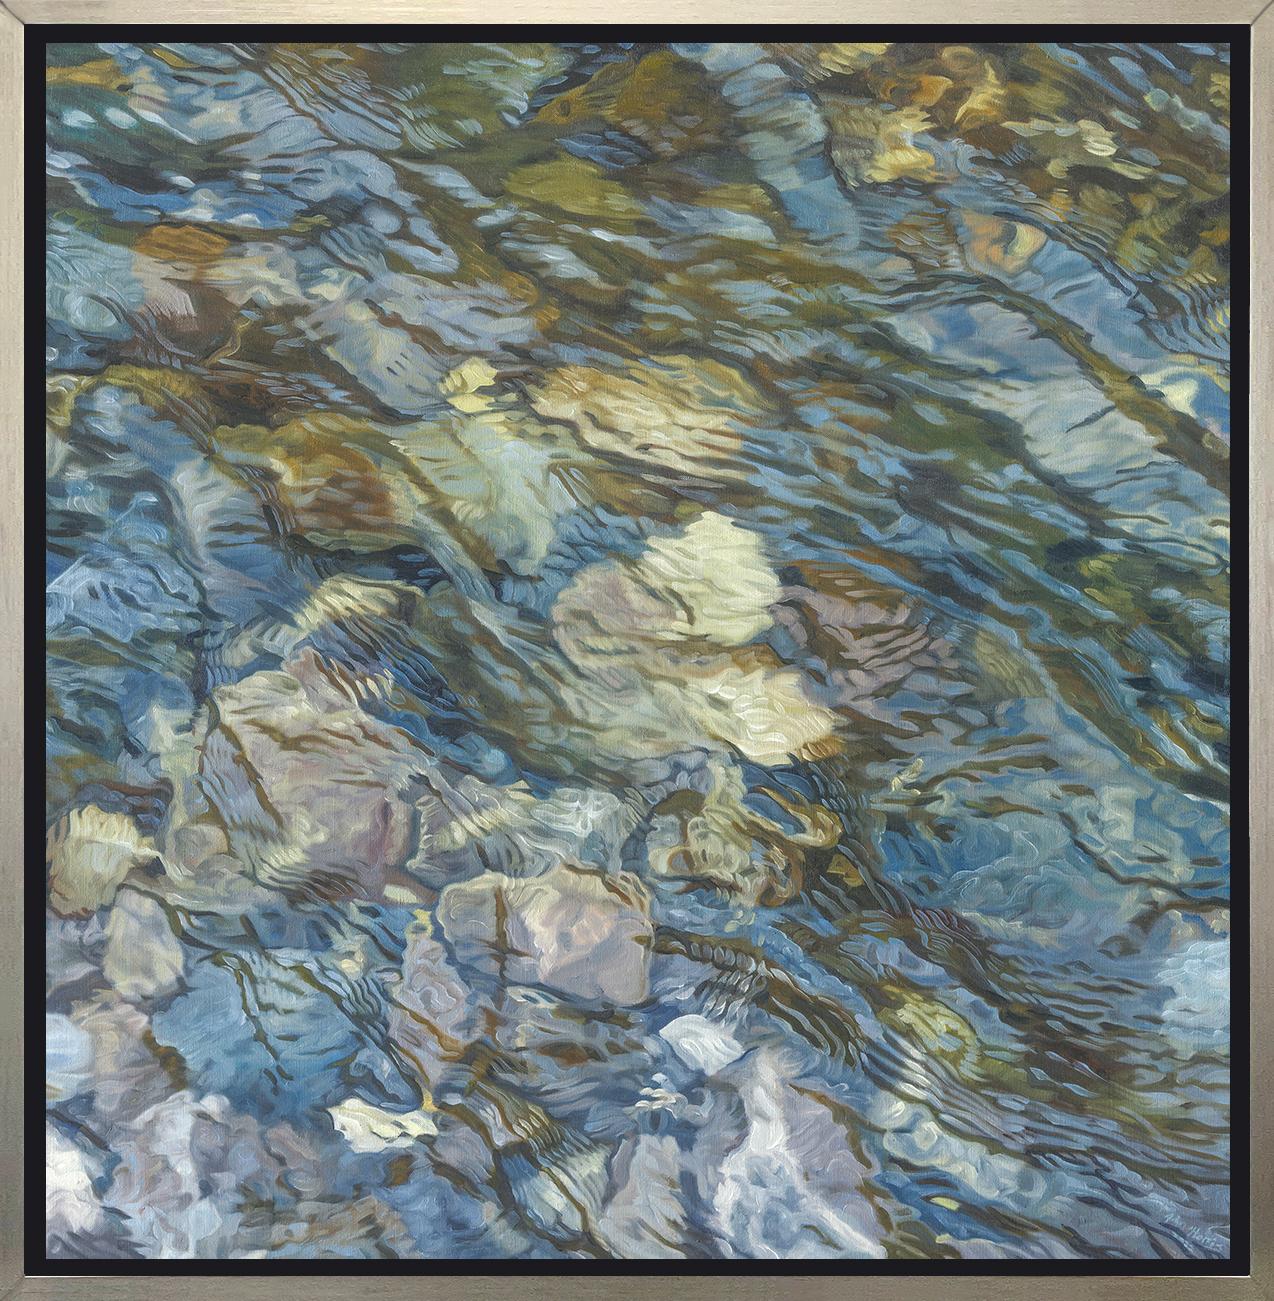 "Riverbed 4, " Framed Limited Edition Giclee Print, 36" x 36"